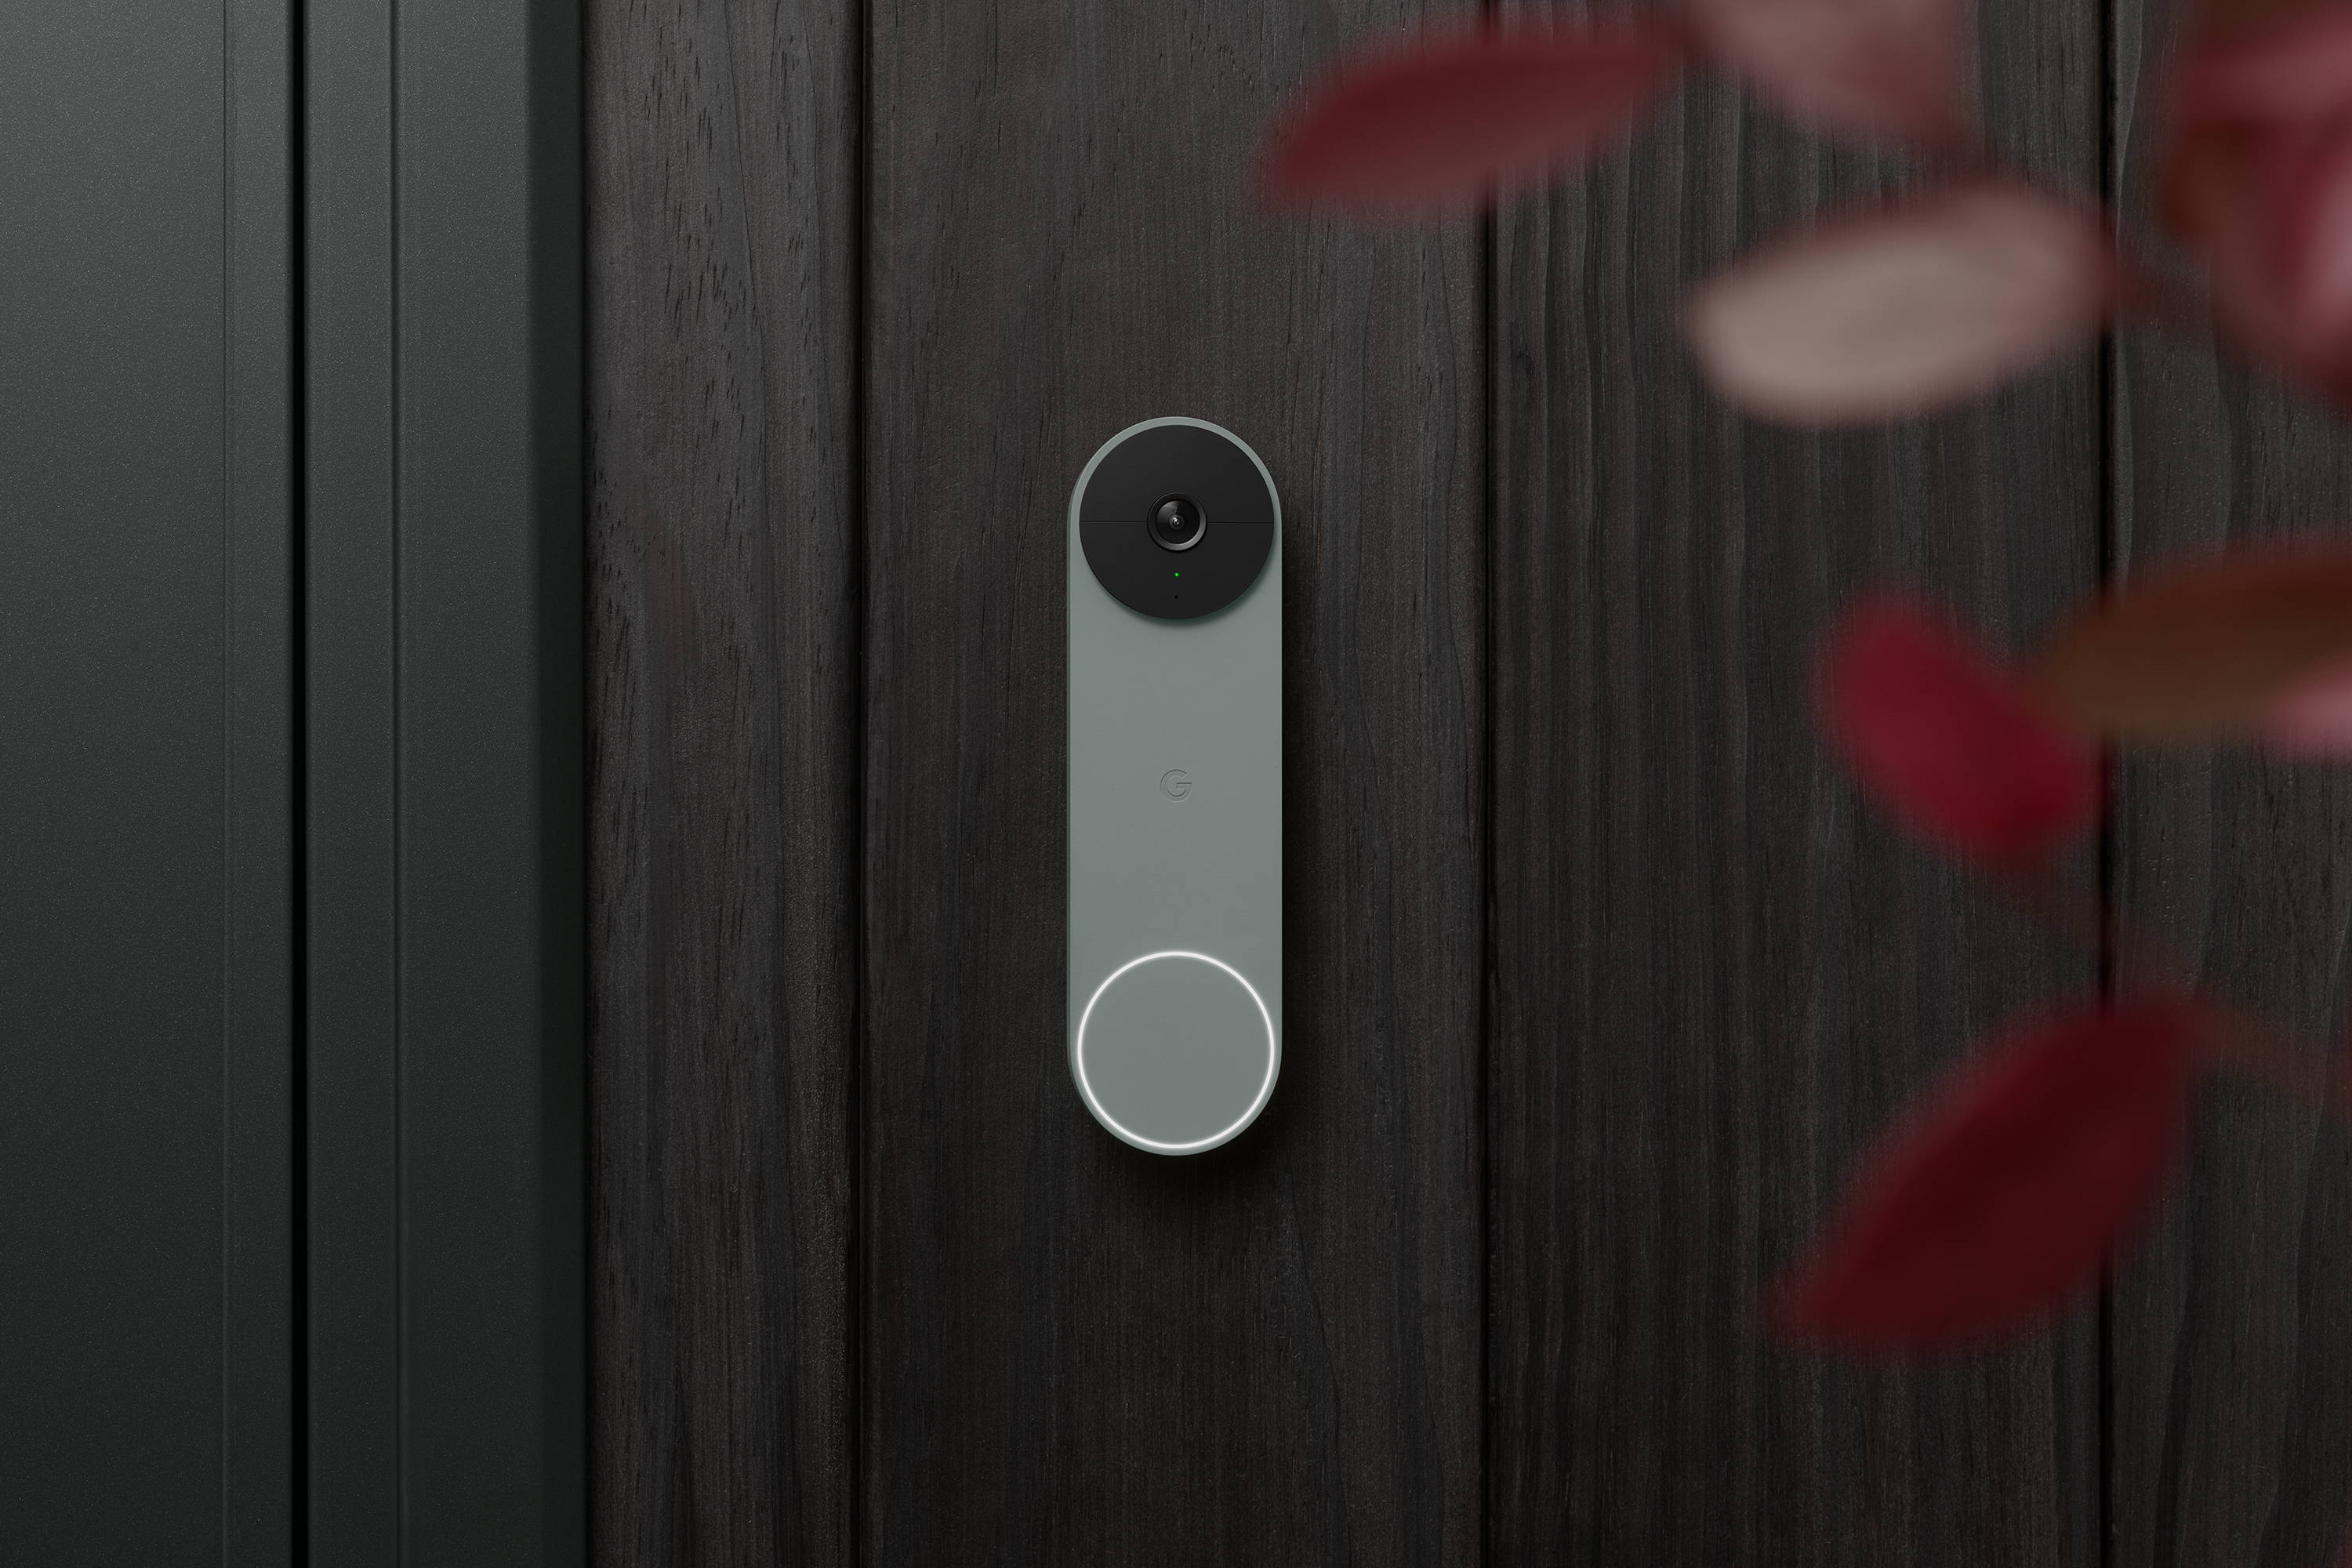 Nest video doorbell videos can be saved for 60 days